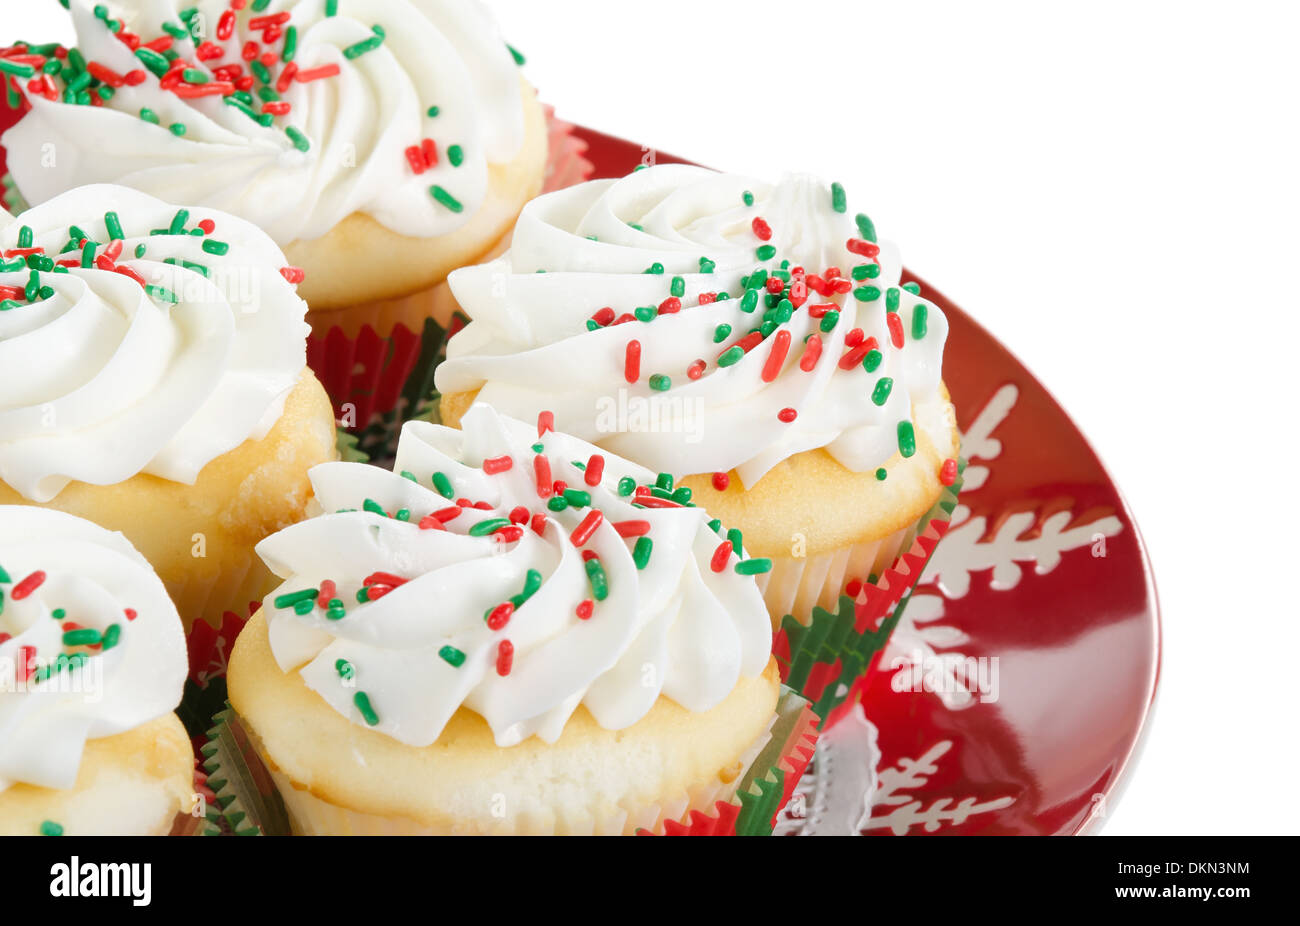 Holiday cupcakes with vanilla frosting and red and green sprinkles, served on a red holiday plate on white background. Stock Photo